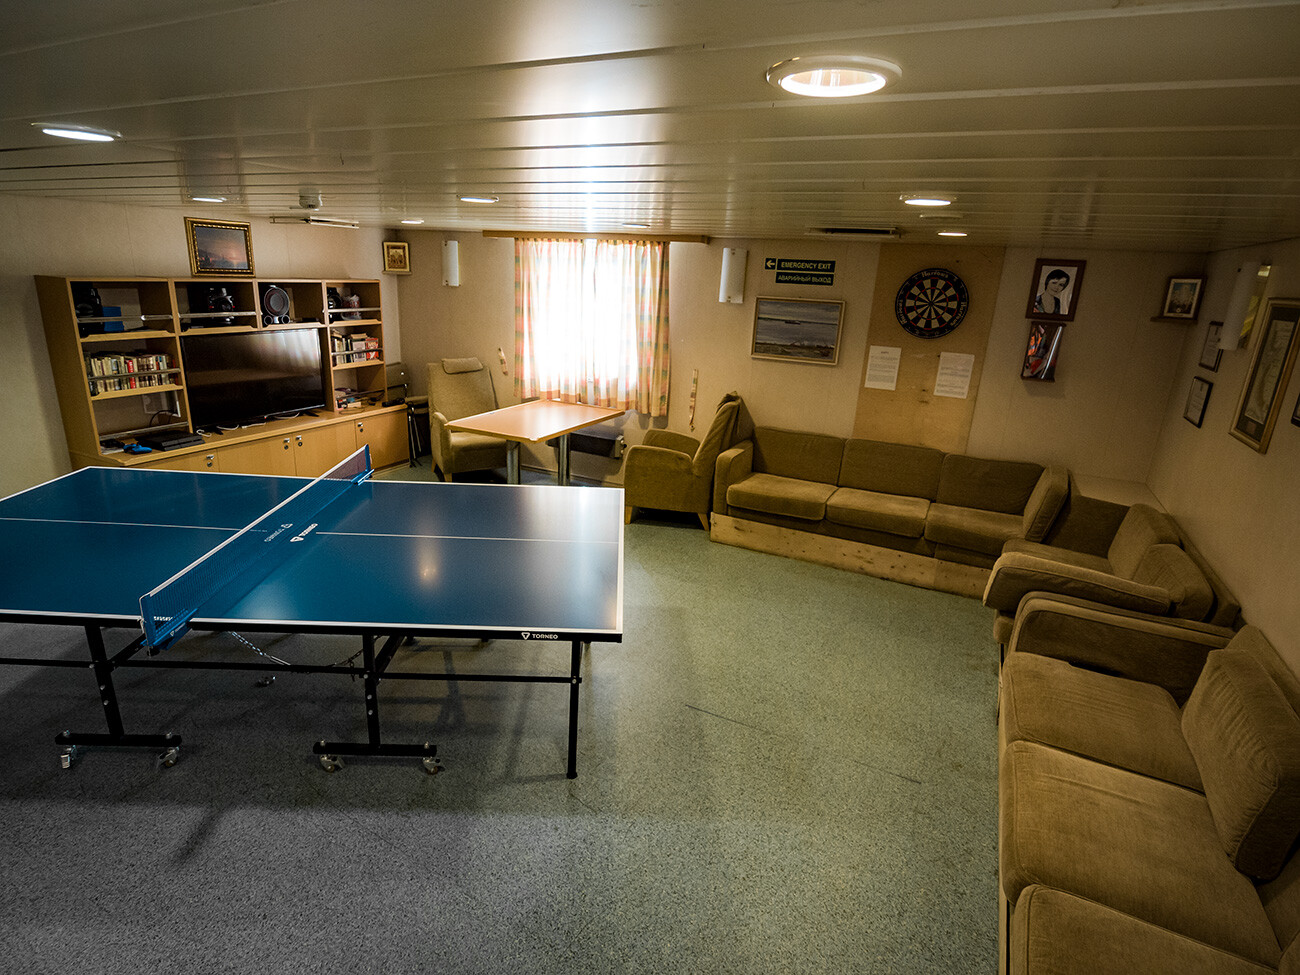 The recreation room.